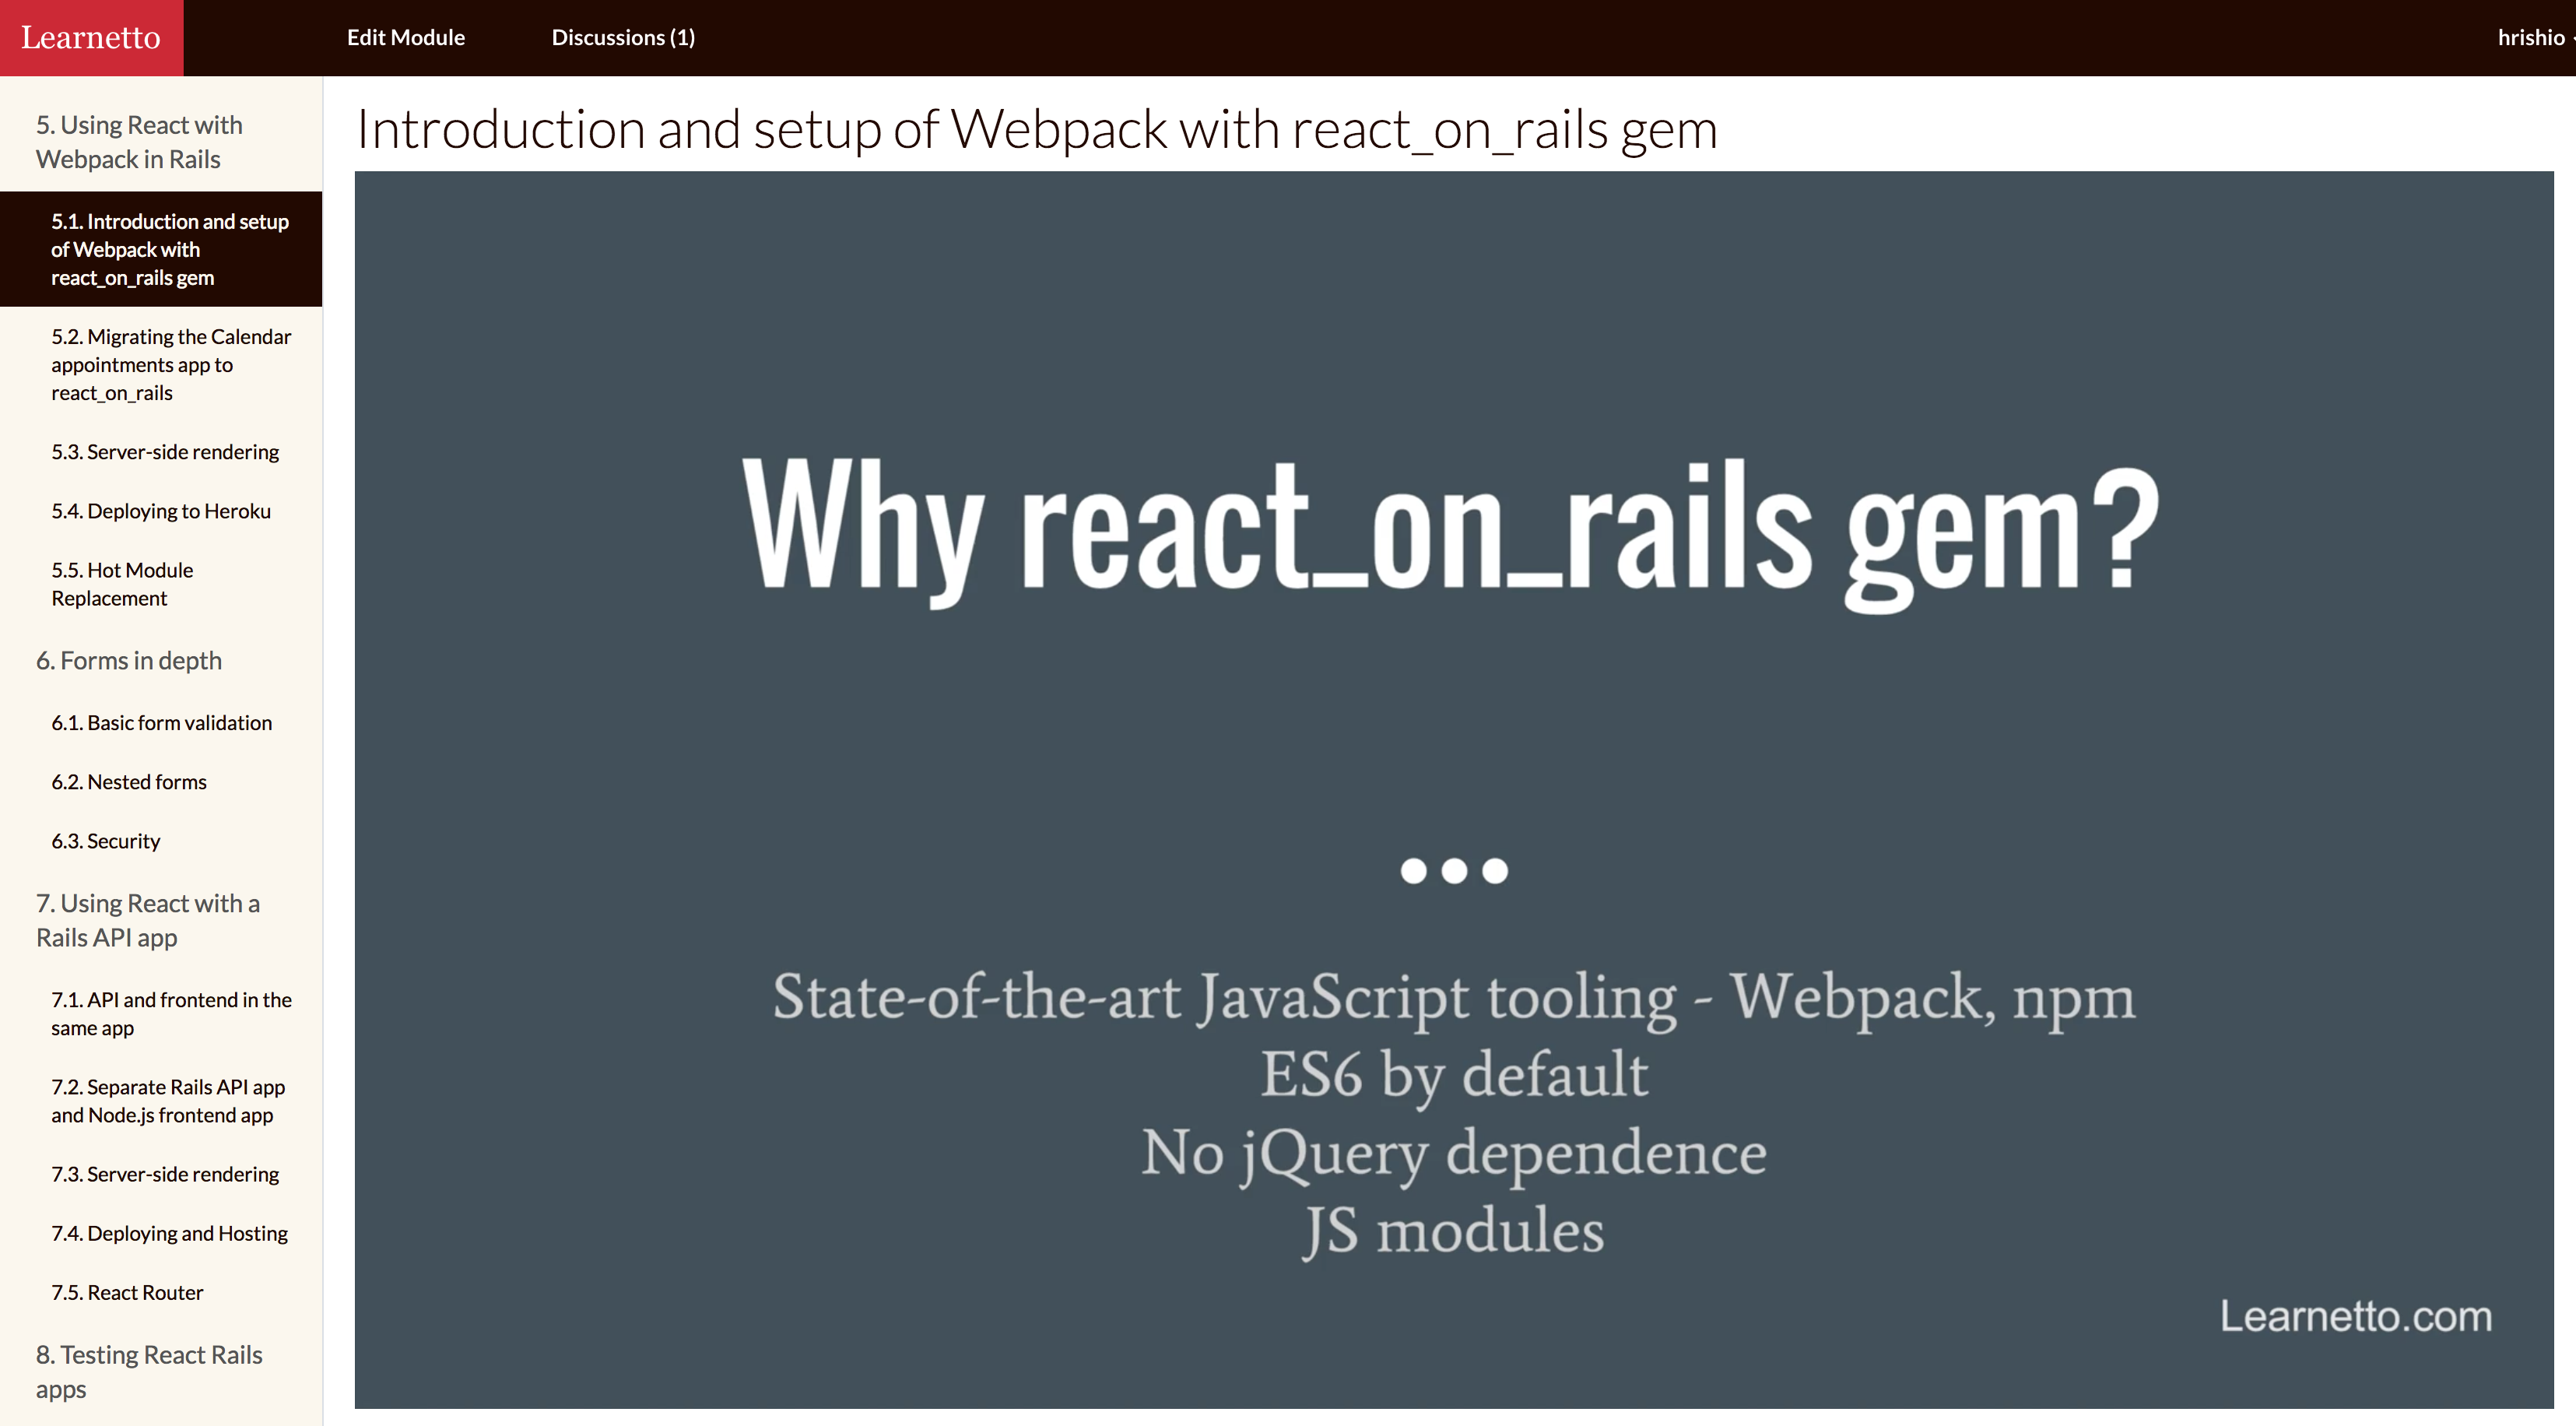 The Complete React on Rails course